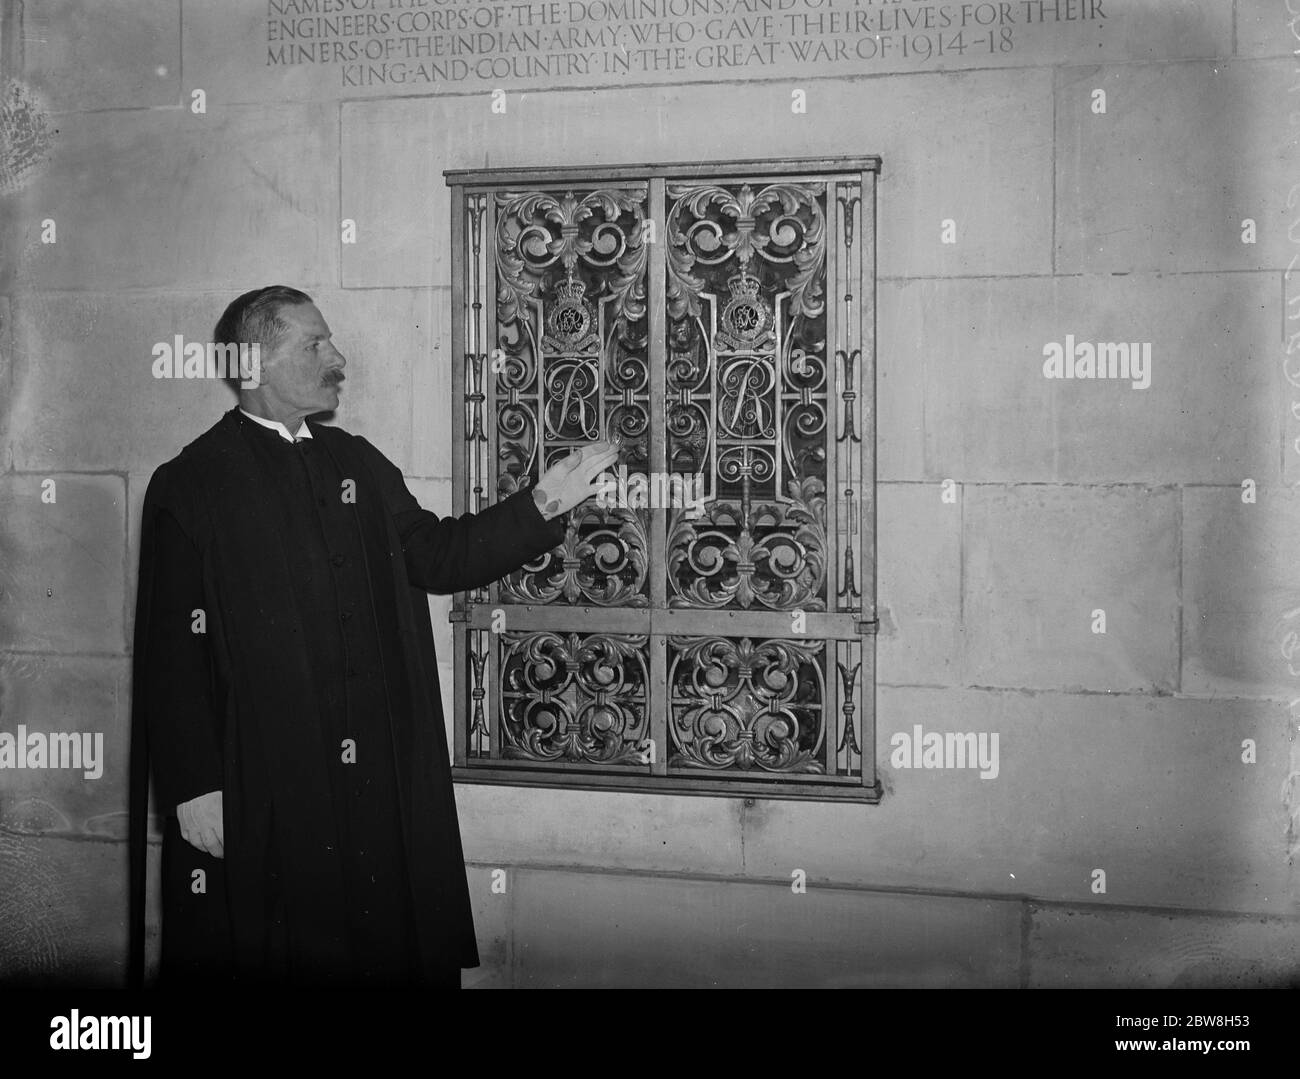 Roll of Honour MP hand must touch . The Verger , Mr J Green , by the Recess containing the Roll of Honour . The Kitchener Chapel in St Paul's Cathedral 17 December 1931 Stock Photo